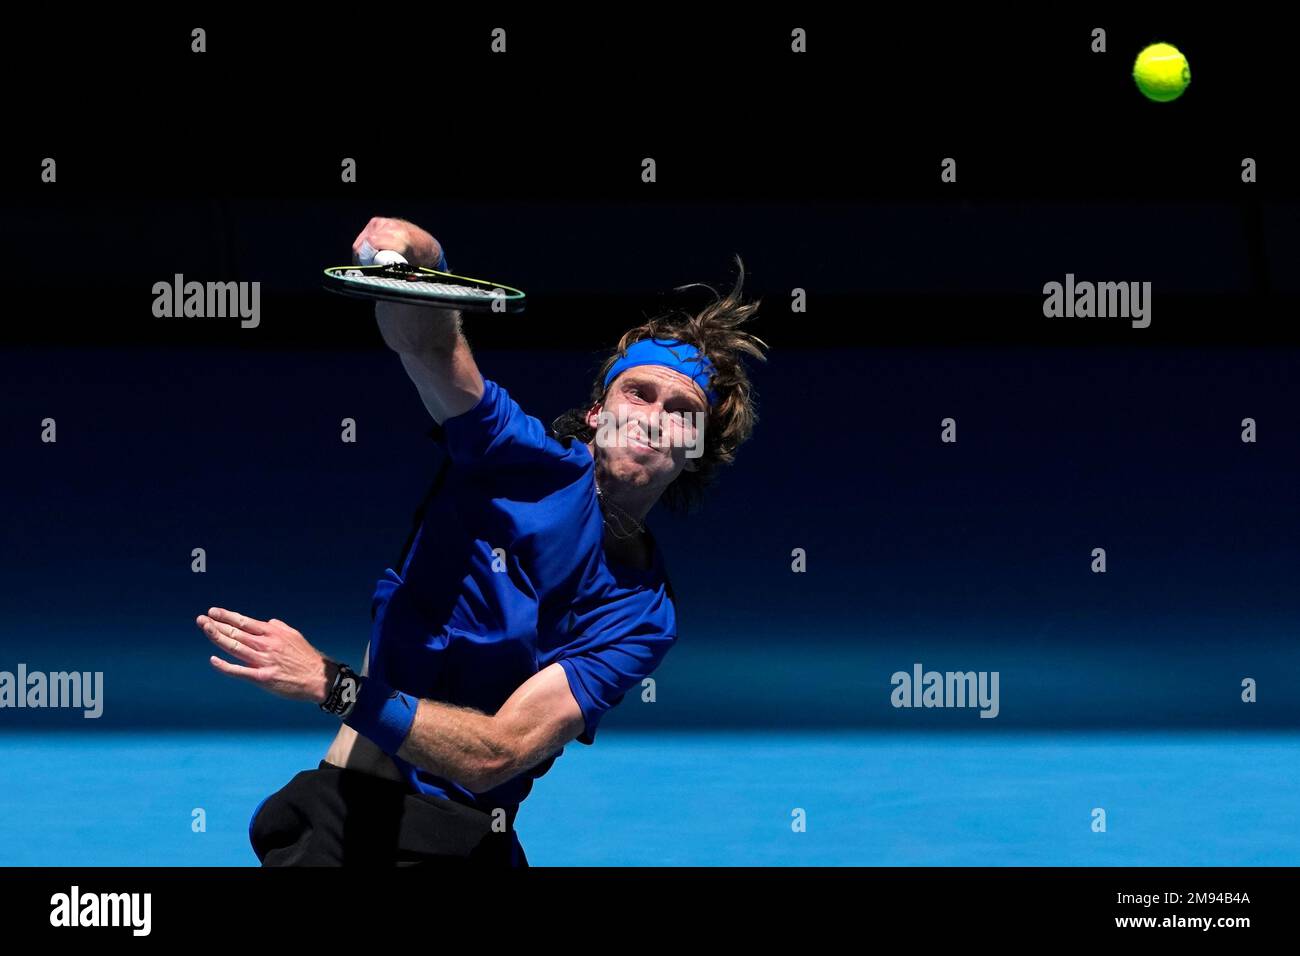 Andrey Rublev of Russia plays a forehand return to Dominic Thiem of Austria during their first round match at the Australian Open tennis championship in Melbourne, Australia, Tuesday, Jan